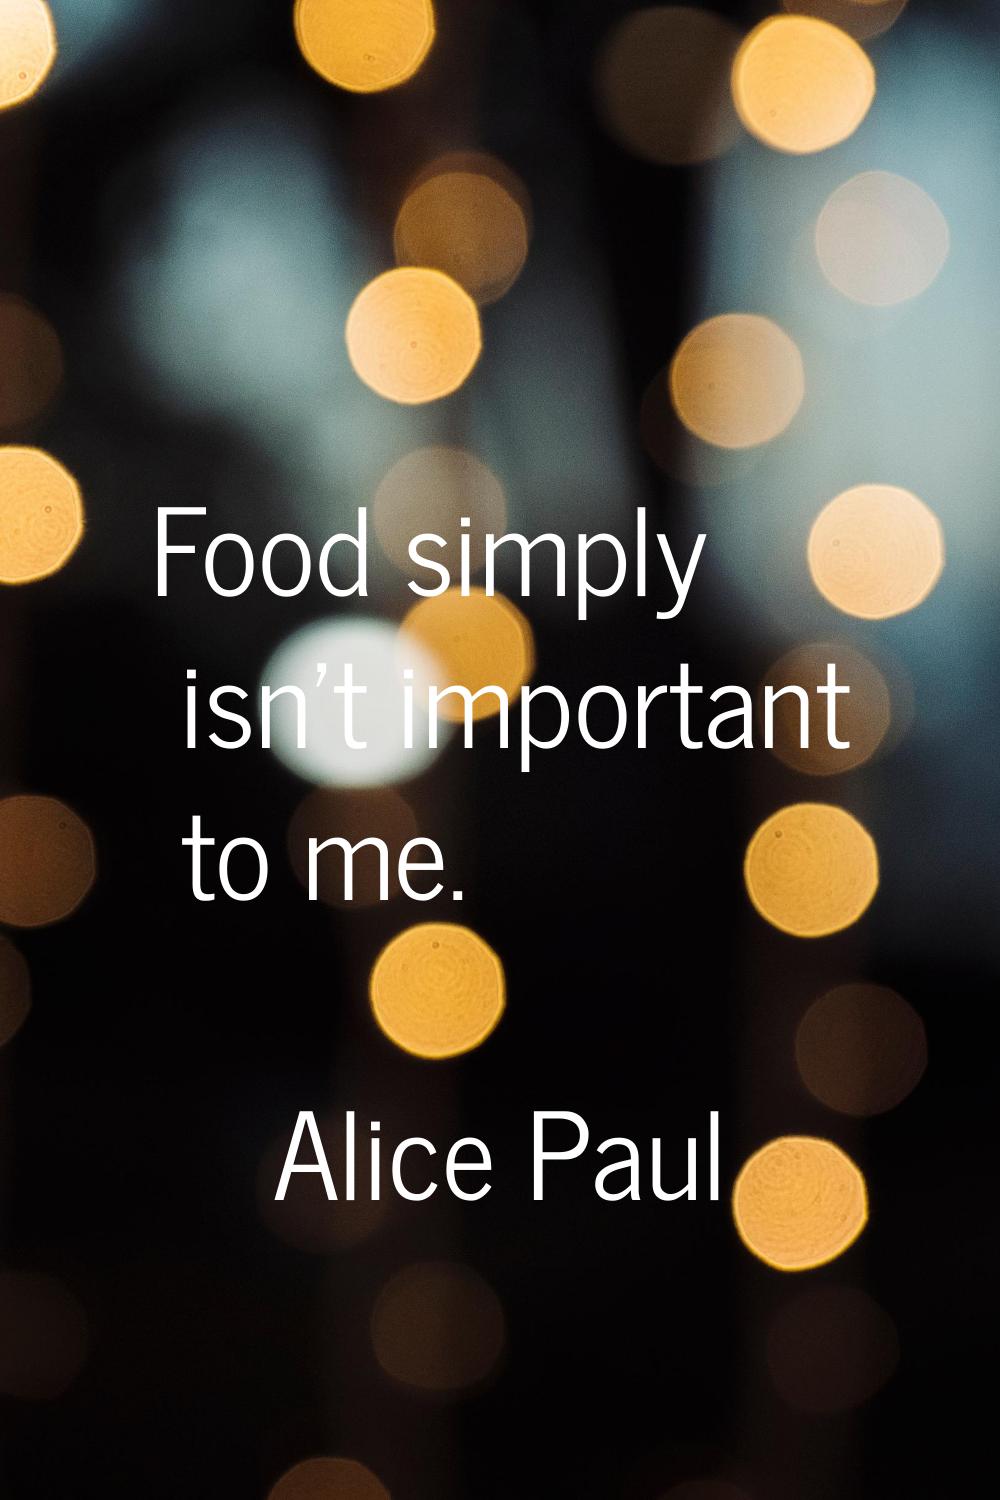 Food simply isn't important to me.